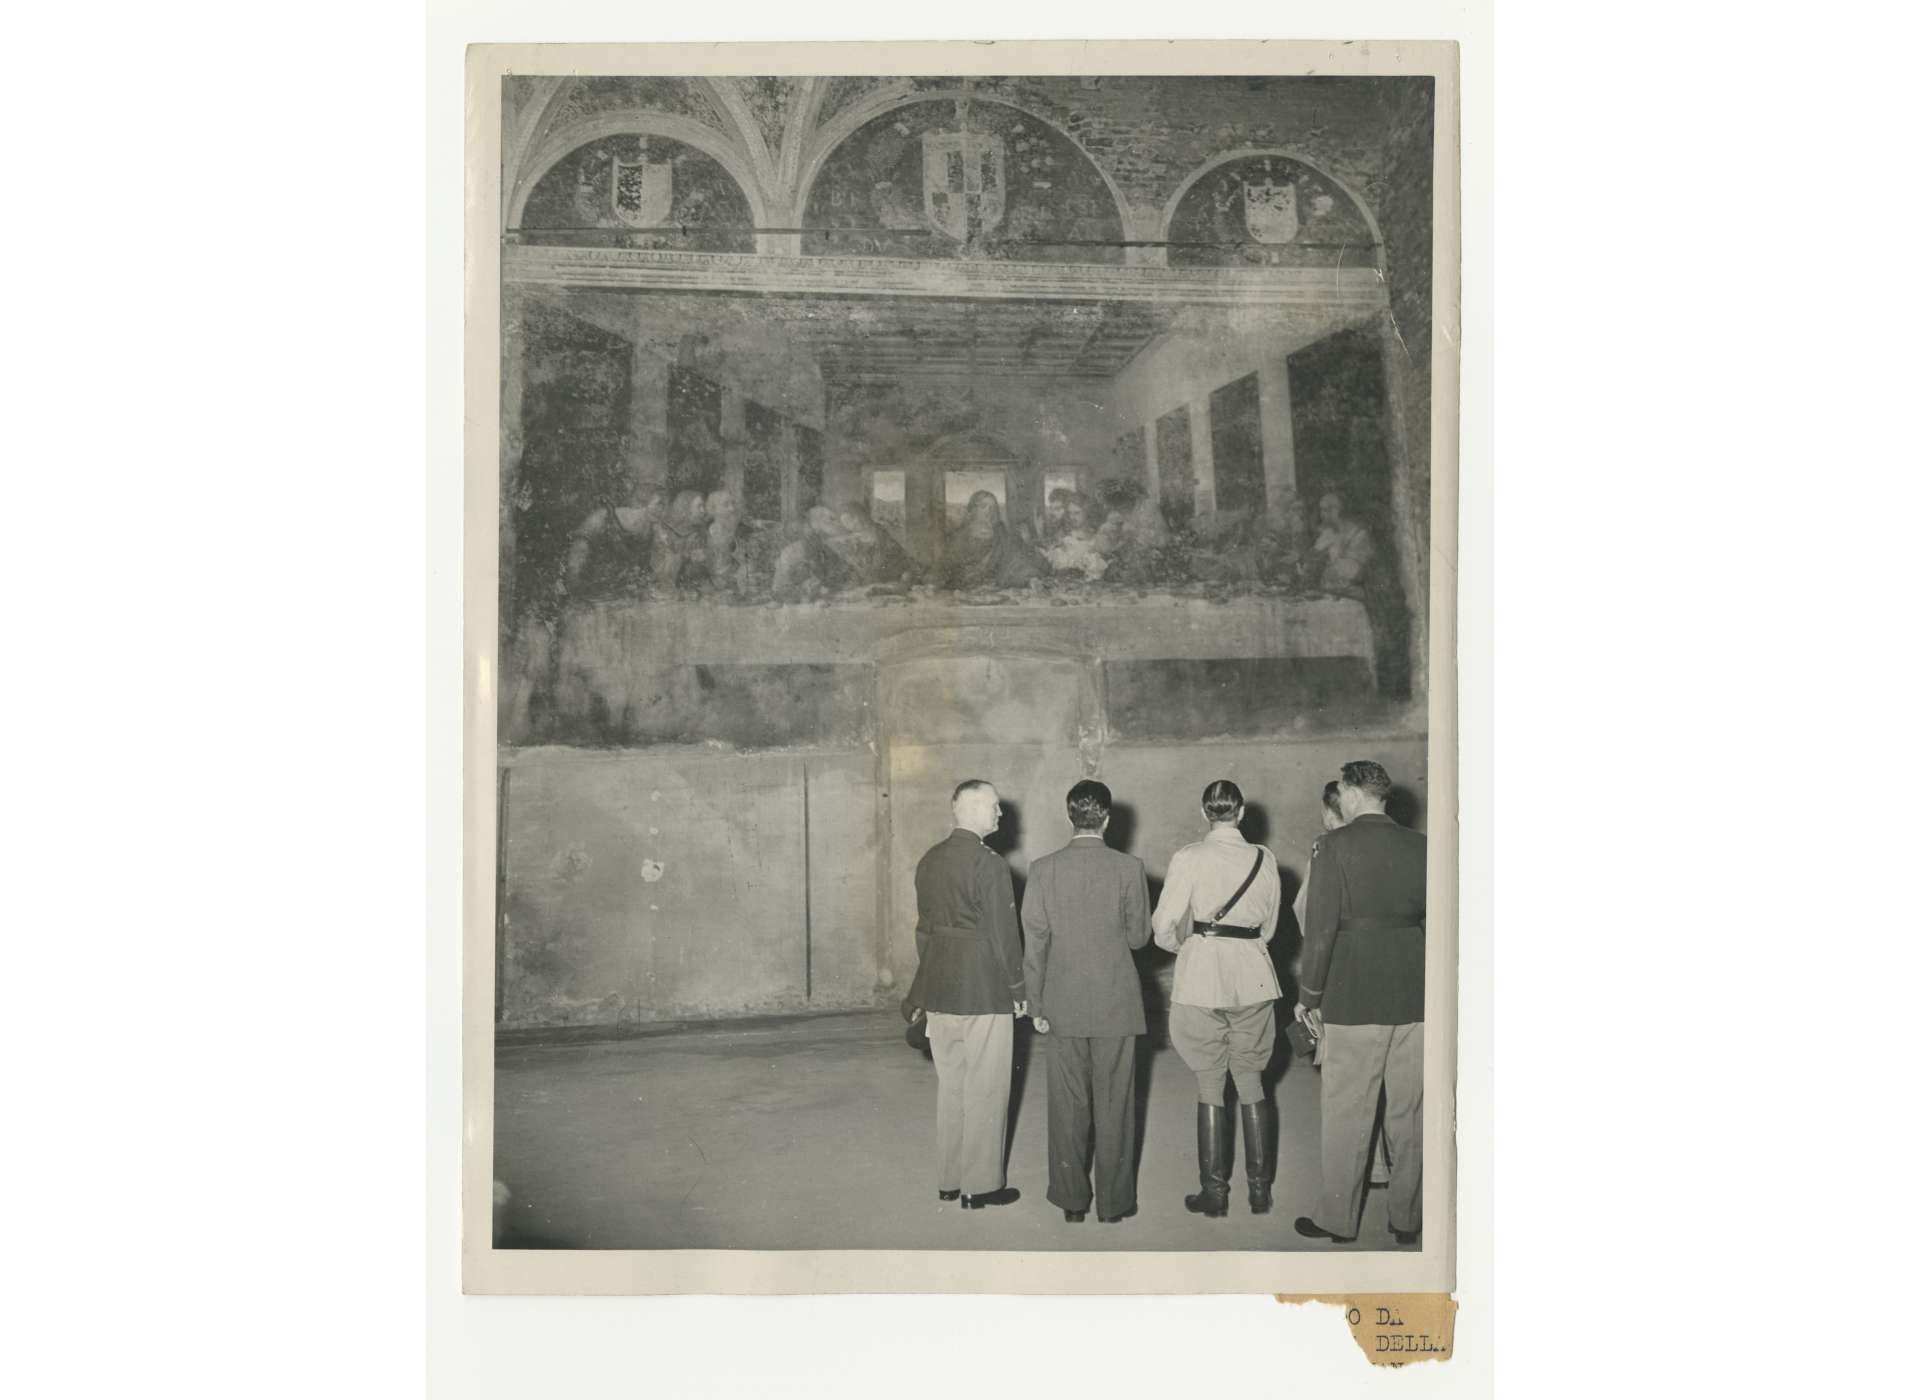 British Field Marshal Harold Wilson and US Major General Willis D. Crittenberger, viewing Leonardo da Vinci’s The Last Supper, Milan, June 25, 1945. Gift of Dylan Utley, from the Collection of The National WWII Museum, 2012.019.010.